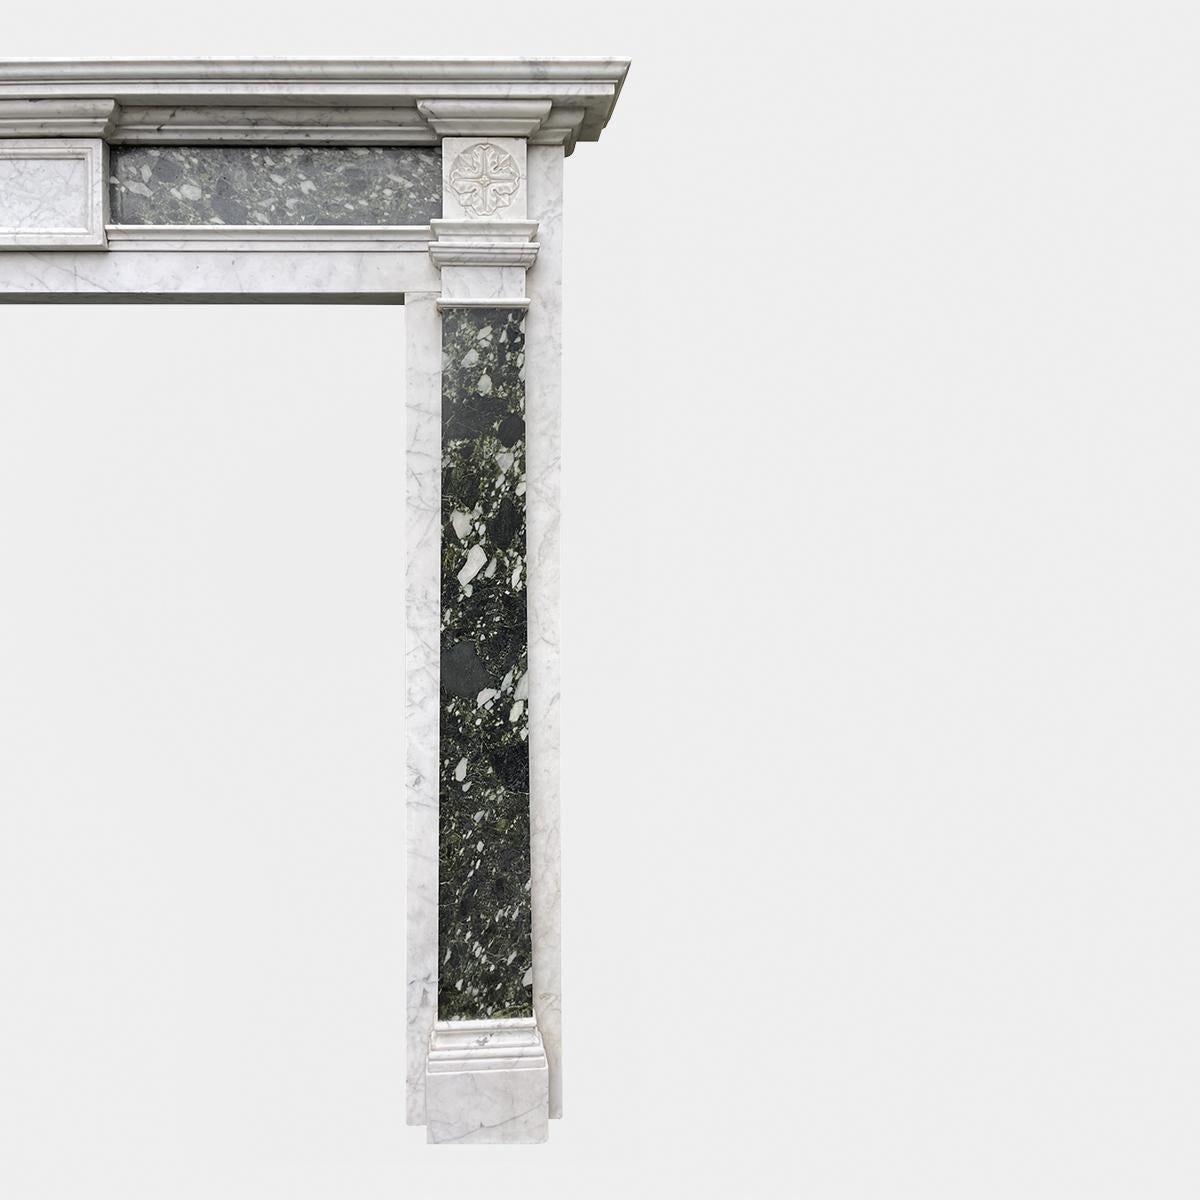 A large Georgian style antique 19th century fireplace mantel of simple yet elegant design in Antico Verde and Pencil Vein Carrara marble. The jambs in Carrara with Pilaster Antico verde supported on Carrara foot blocks and mouldings with Carrara